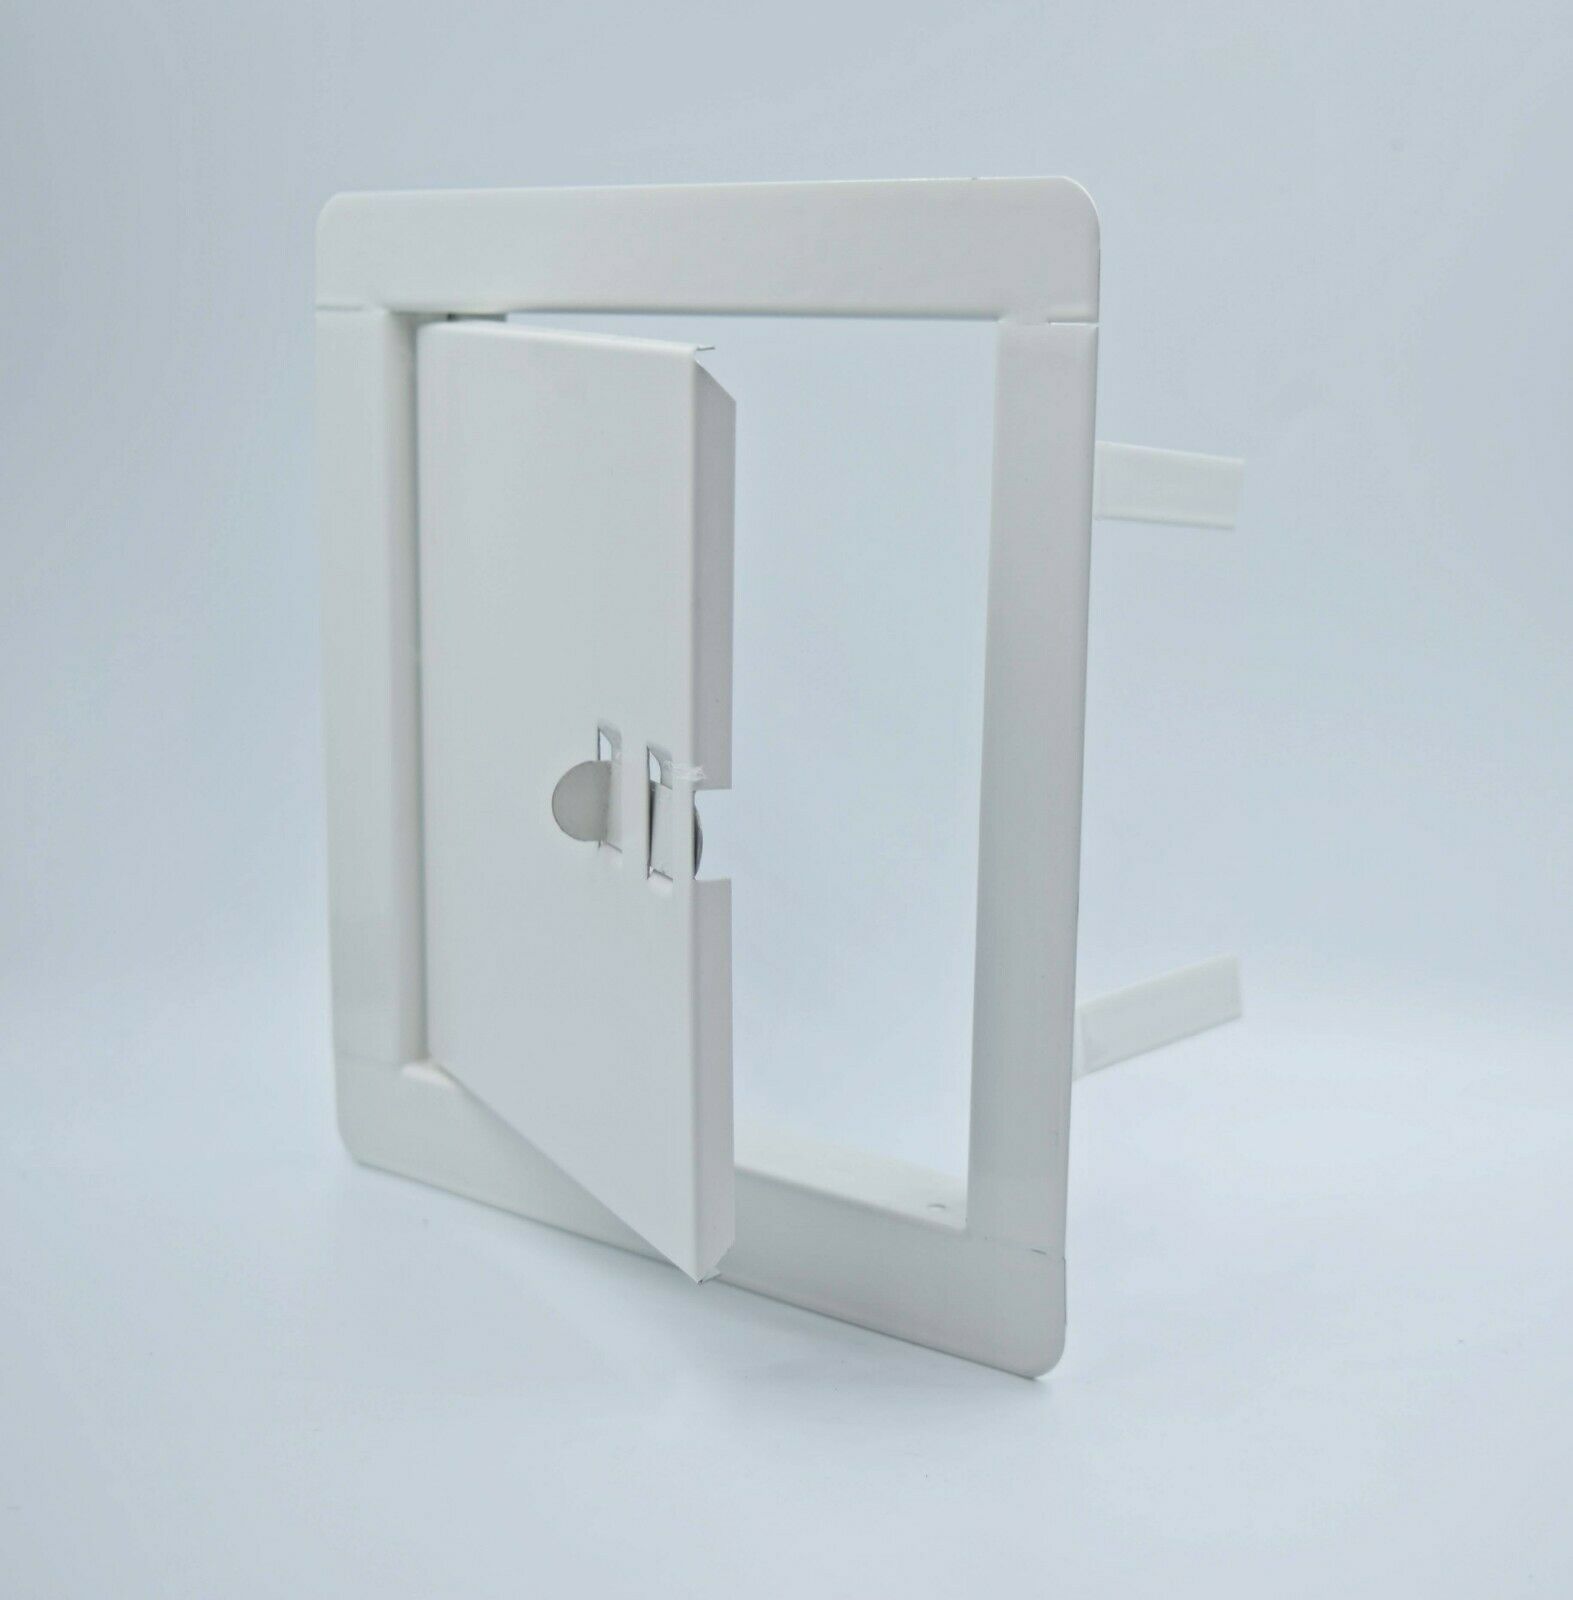 Metal White Access Panels 135mm X 135mm / Steel Wall Revision Door / Flap